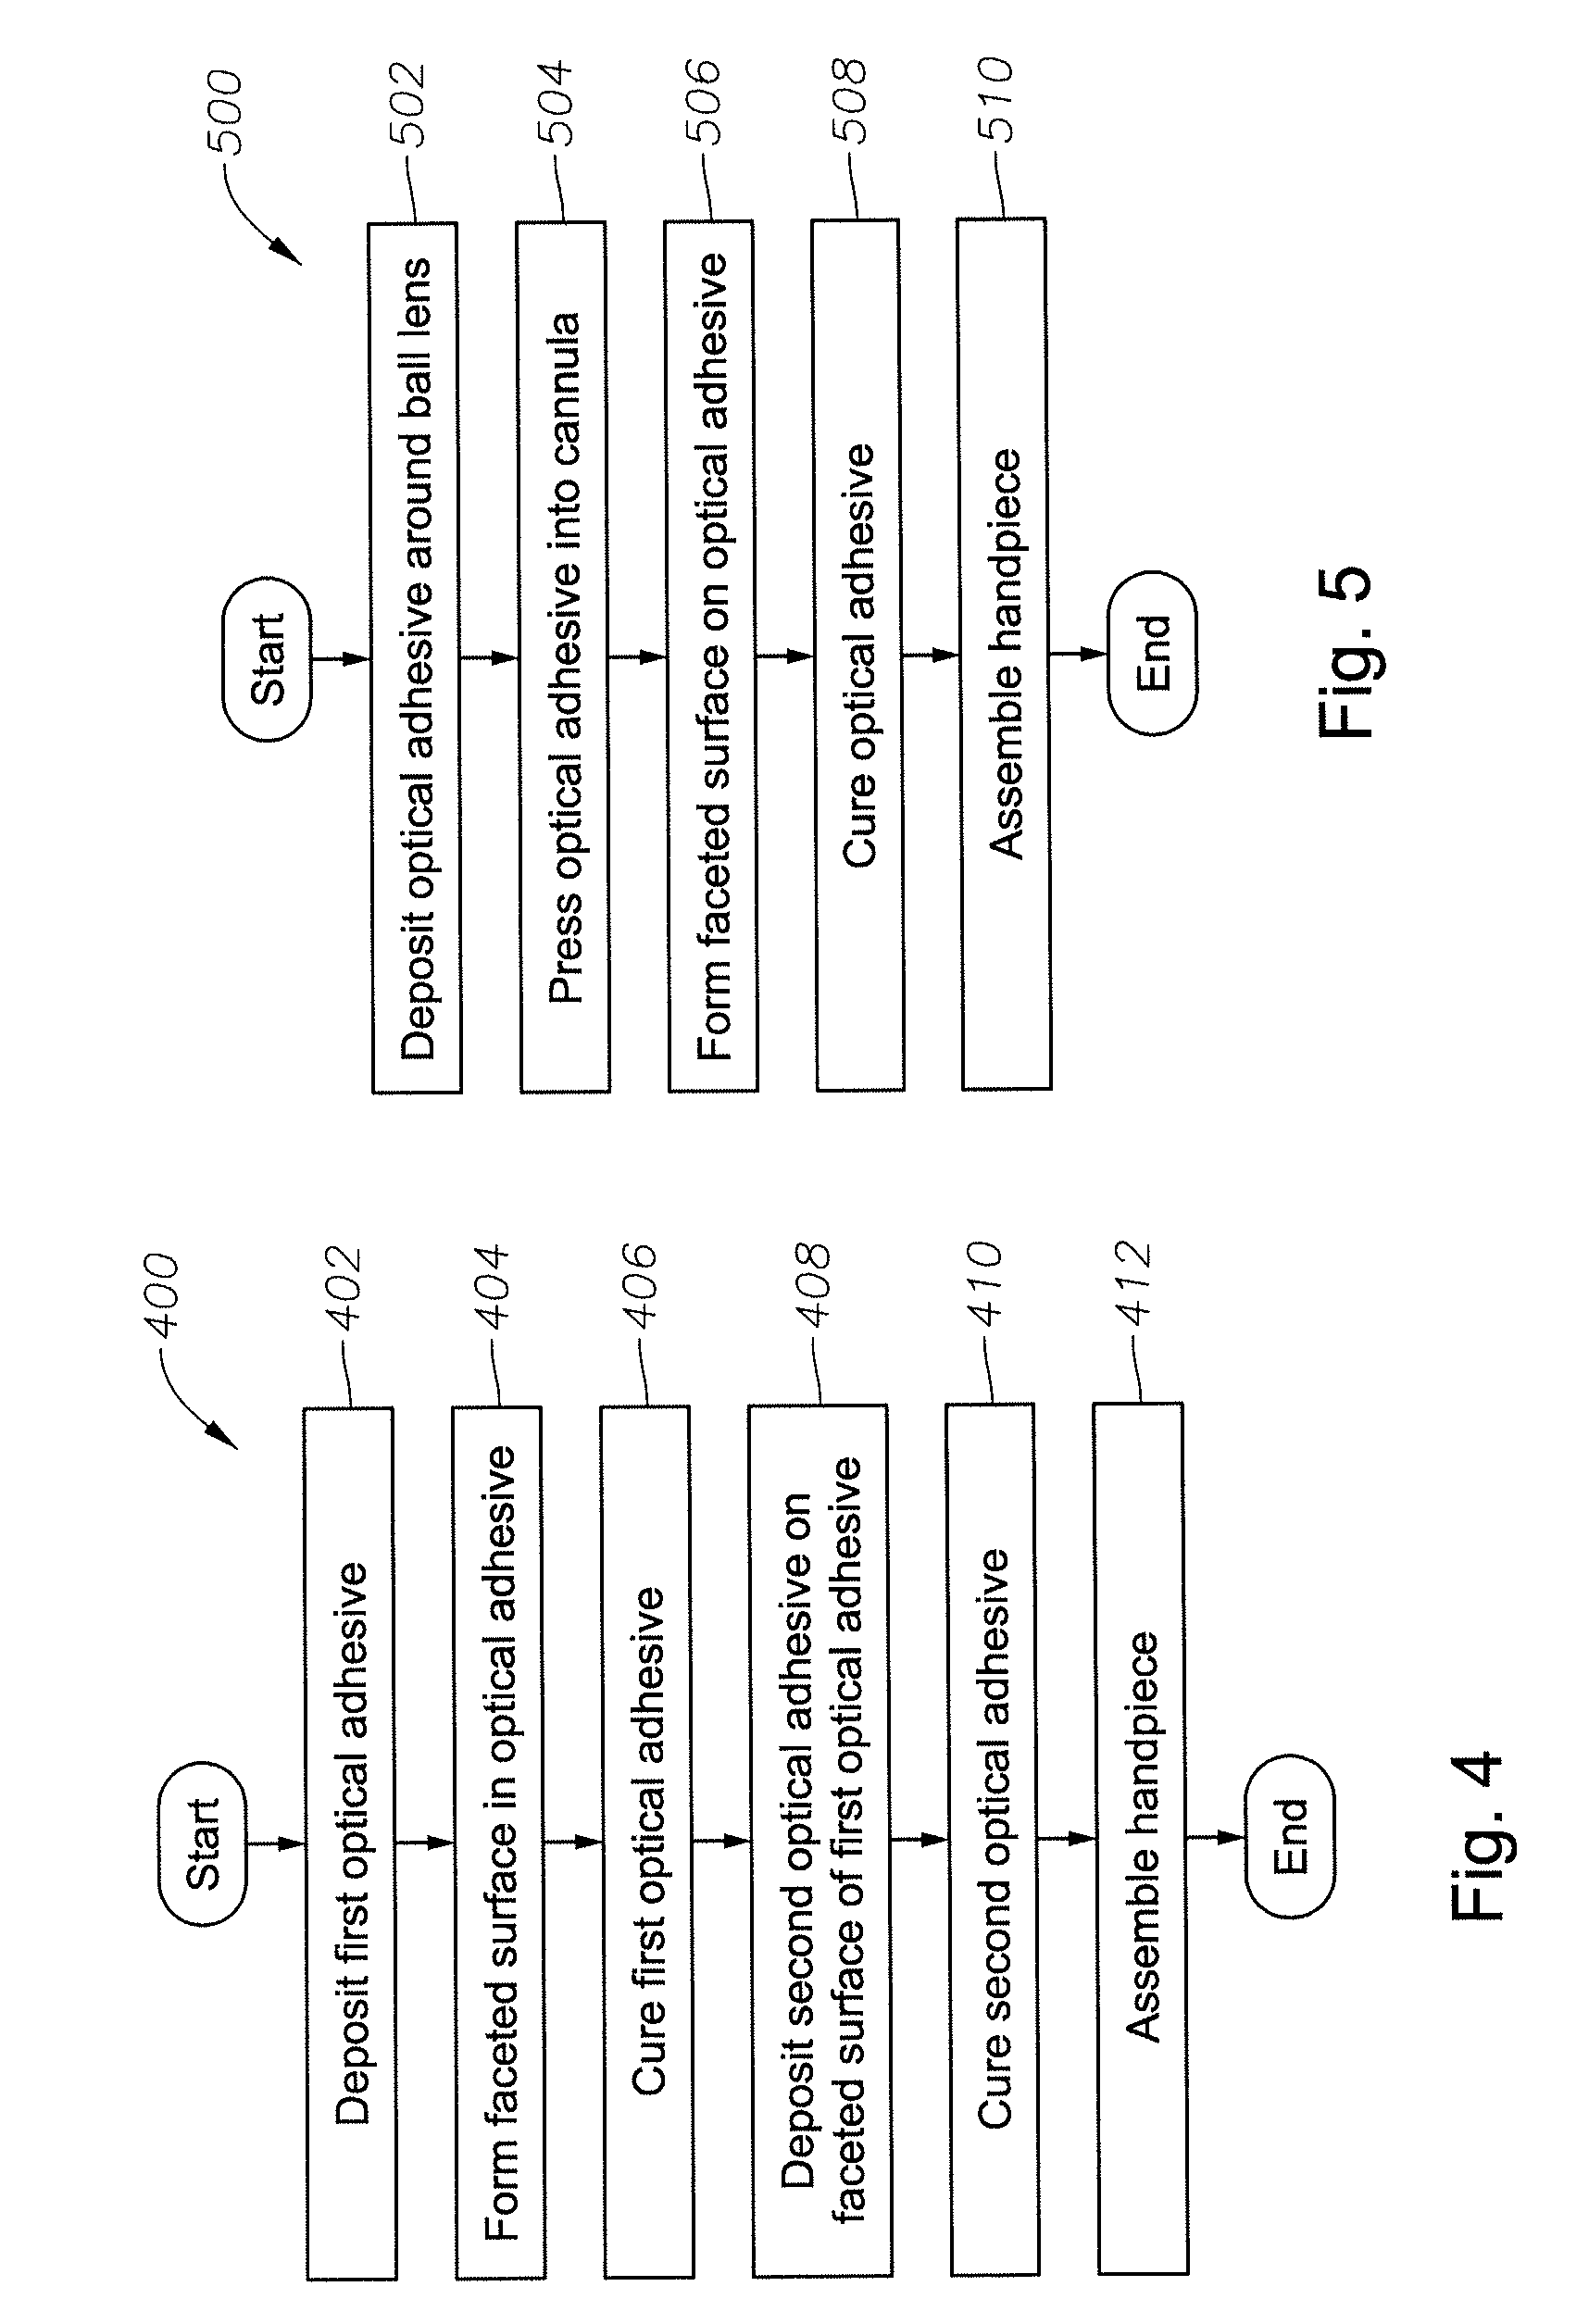 Multi-spot laser surgical probe using faceted optical elements